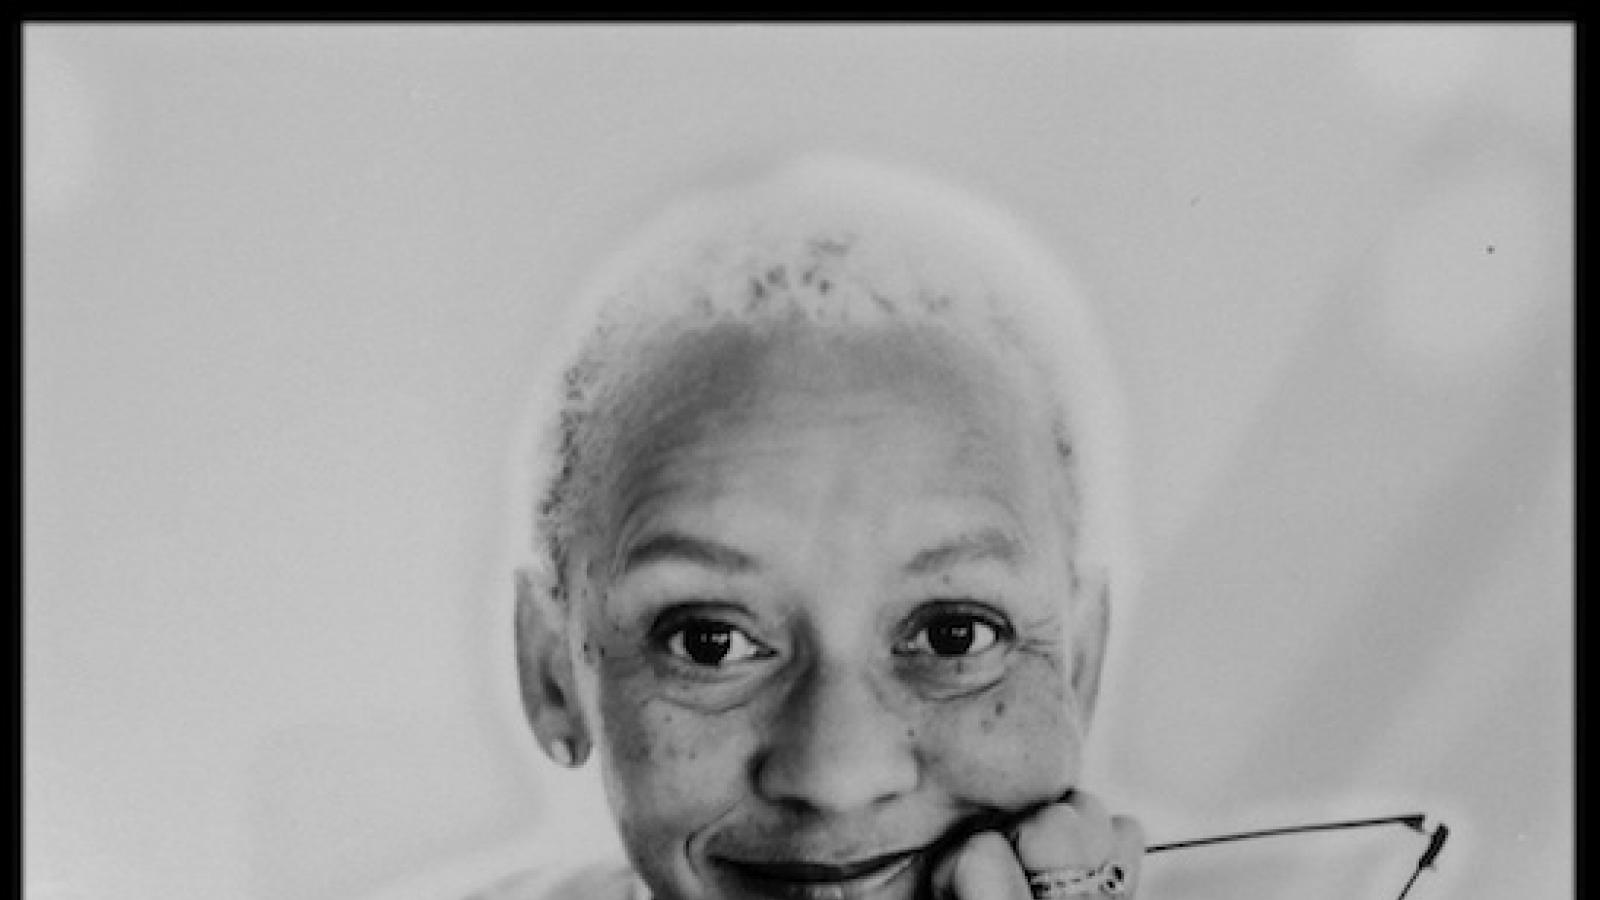 black and white photo of older African-American woman with natural short gray hair